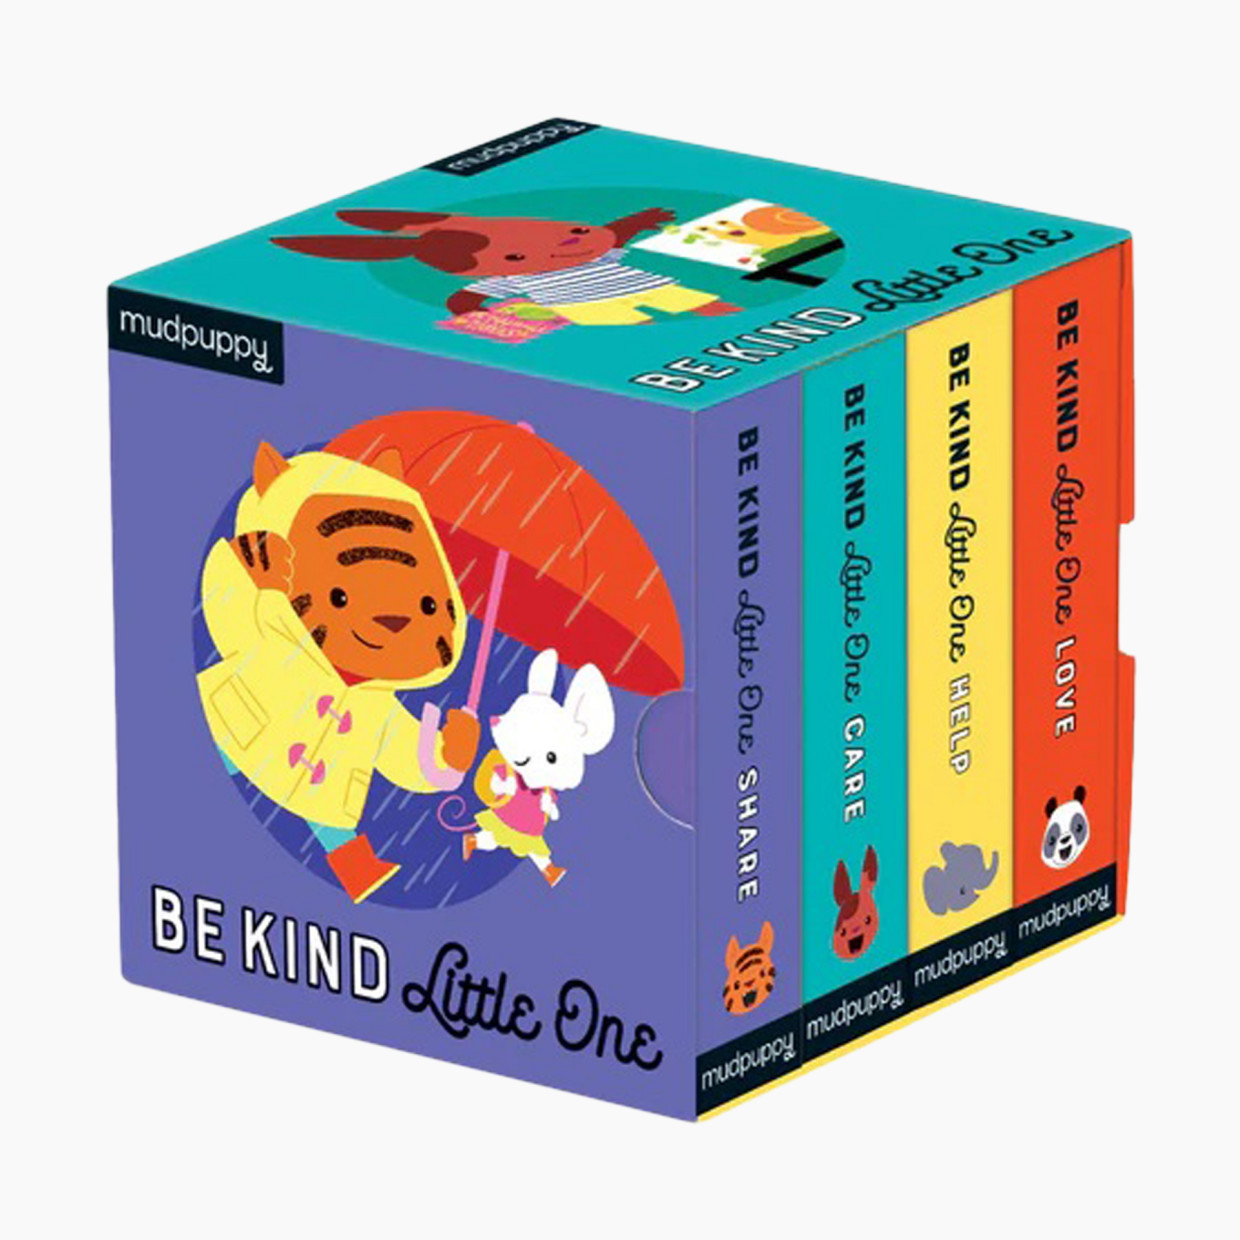 Hachette Book Group Be Kind Little One Board Book Set.